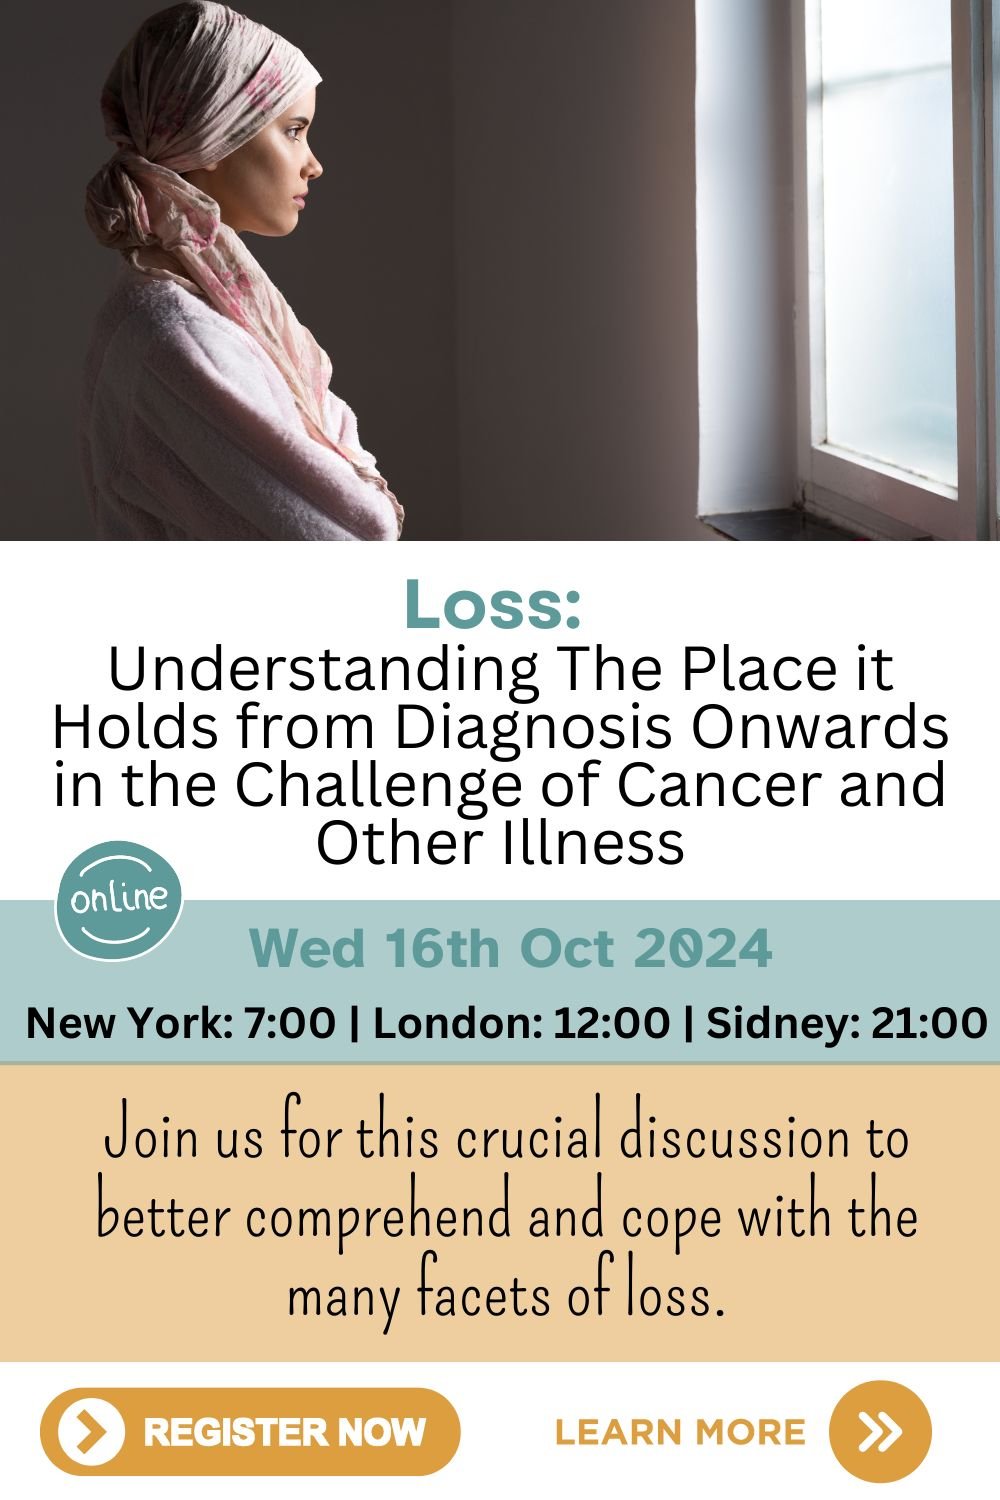 Loss: Understanding The Place it Holds from Diagnosis Onwards in the Challenge of Cancer and Other Illness